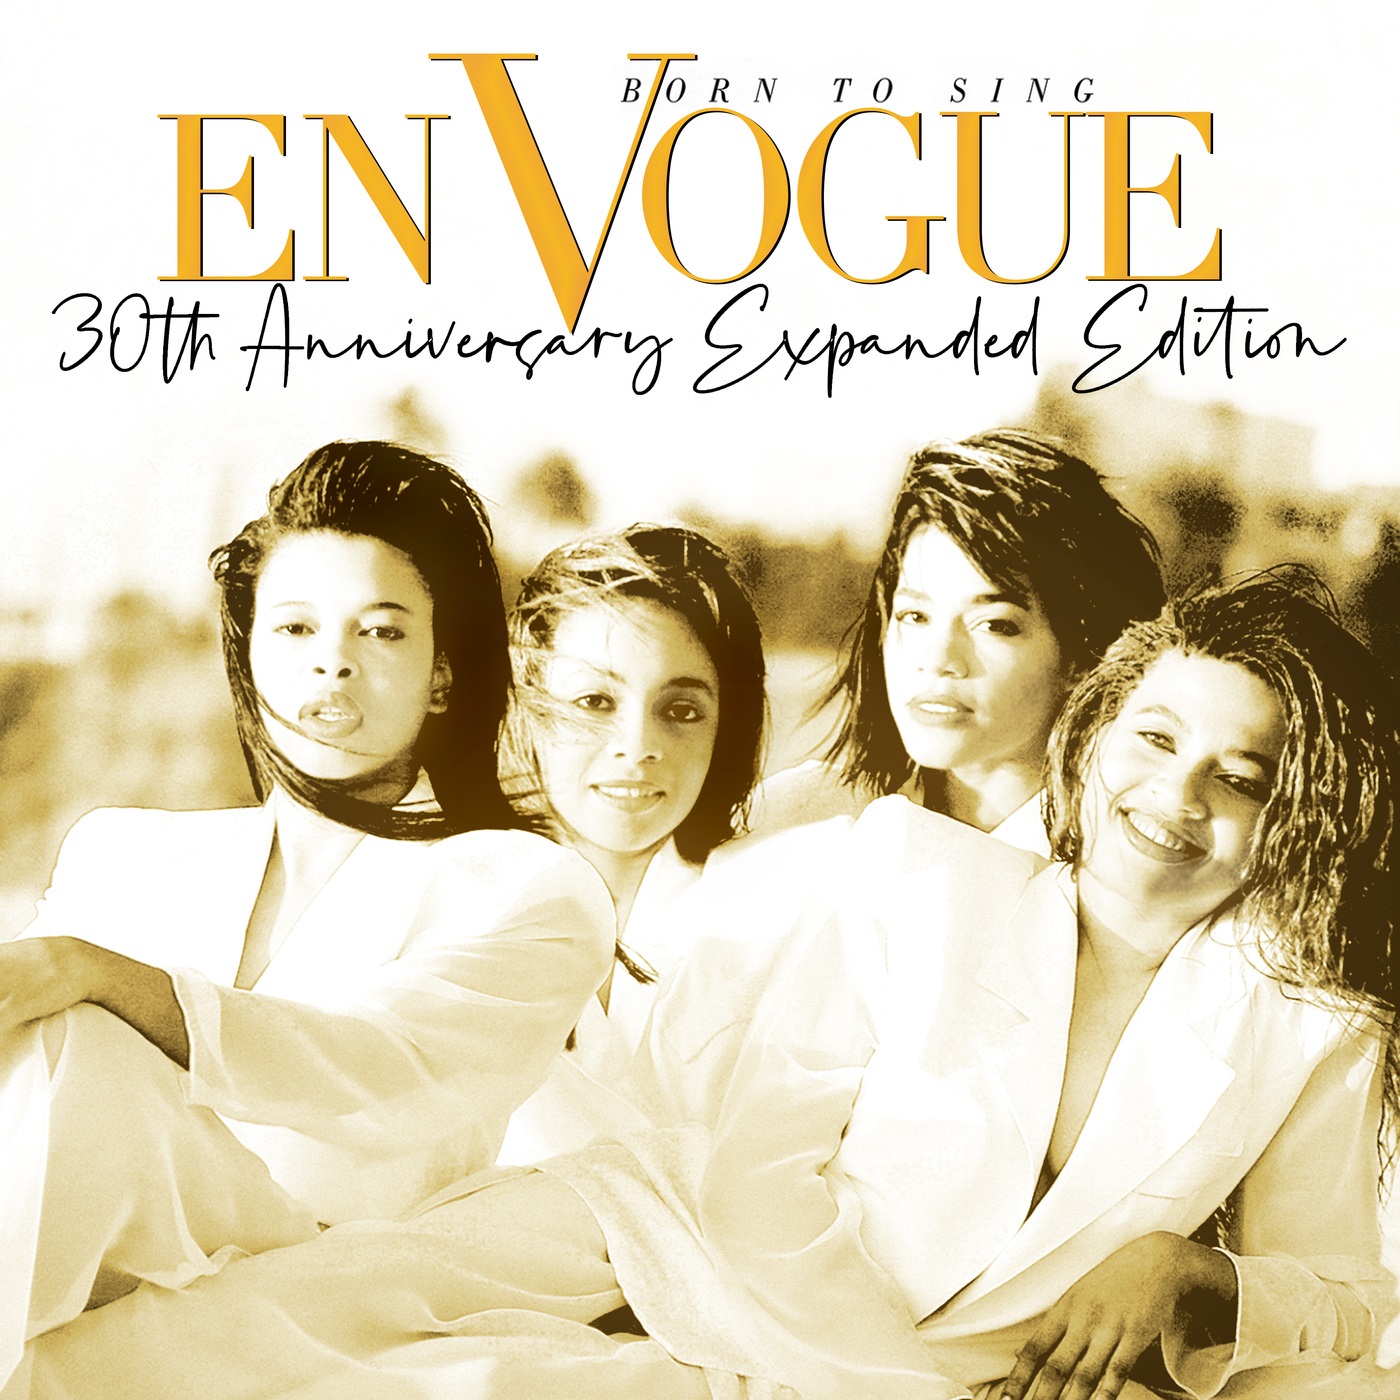 En Vogue - Born To Sing (30th Anniversary Expanded Edition) (1990/2020) [FLAC 24bit/96kHz]